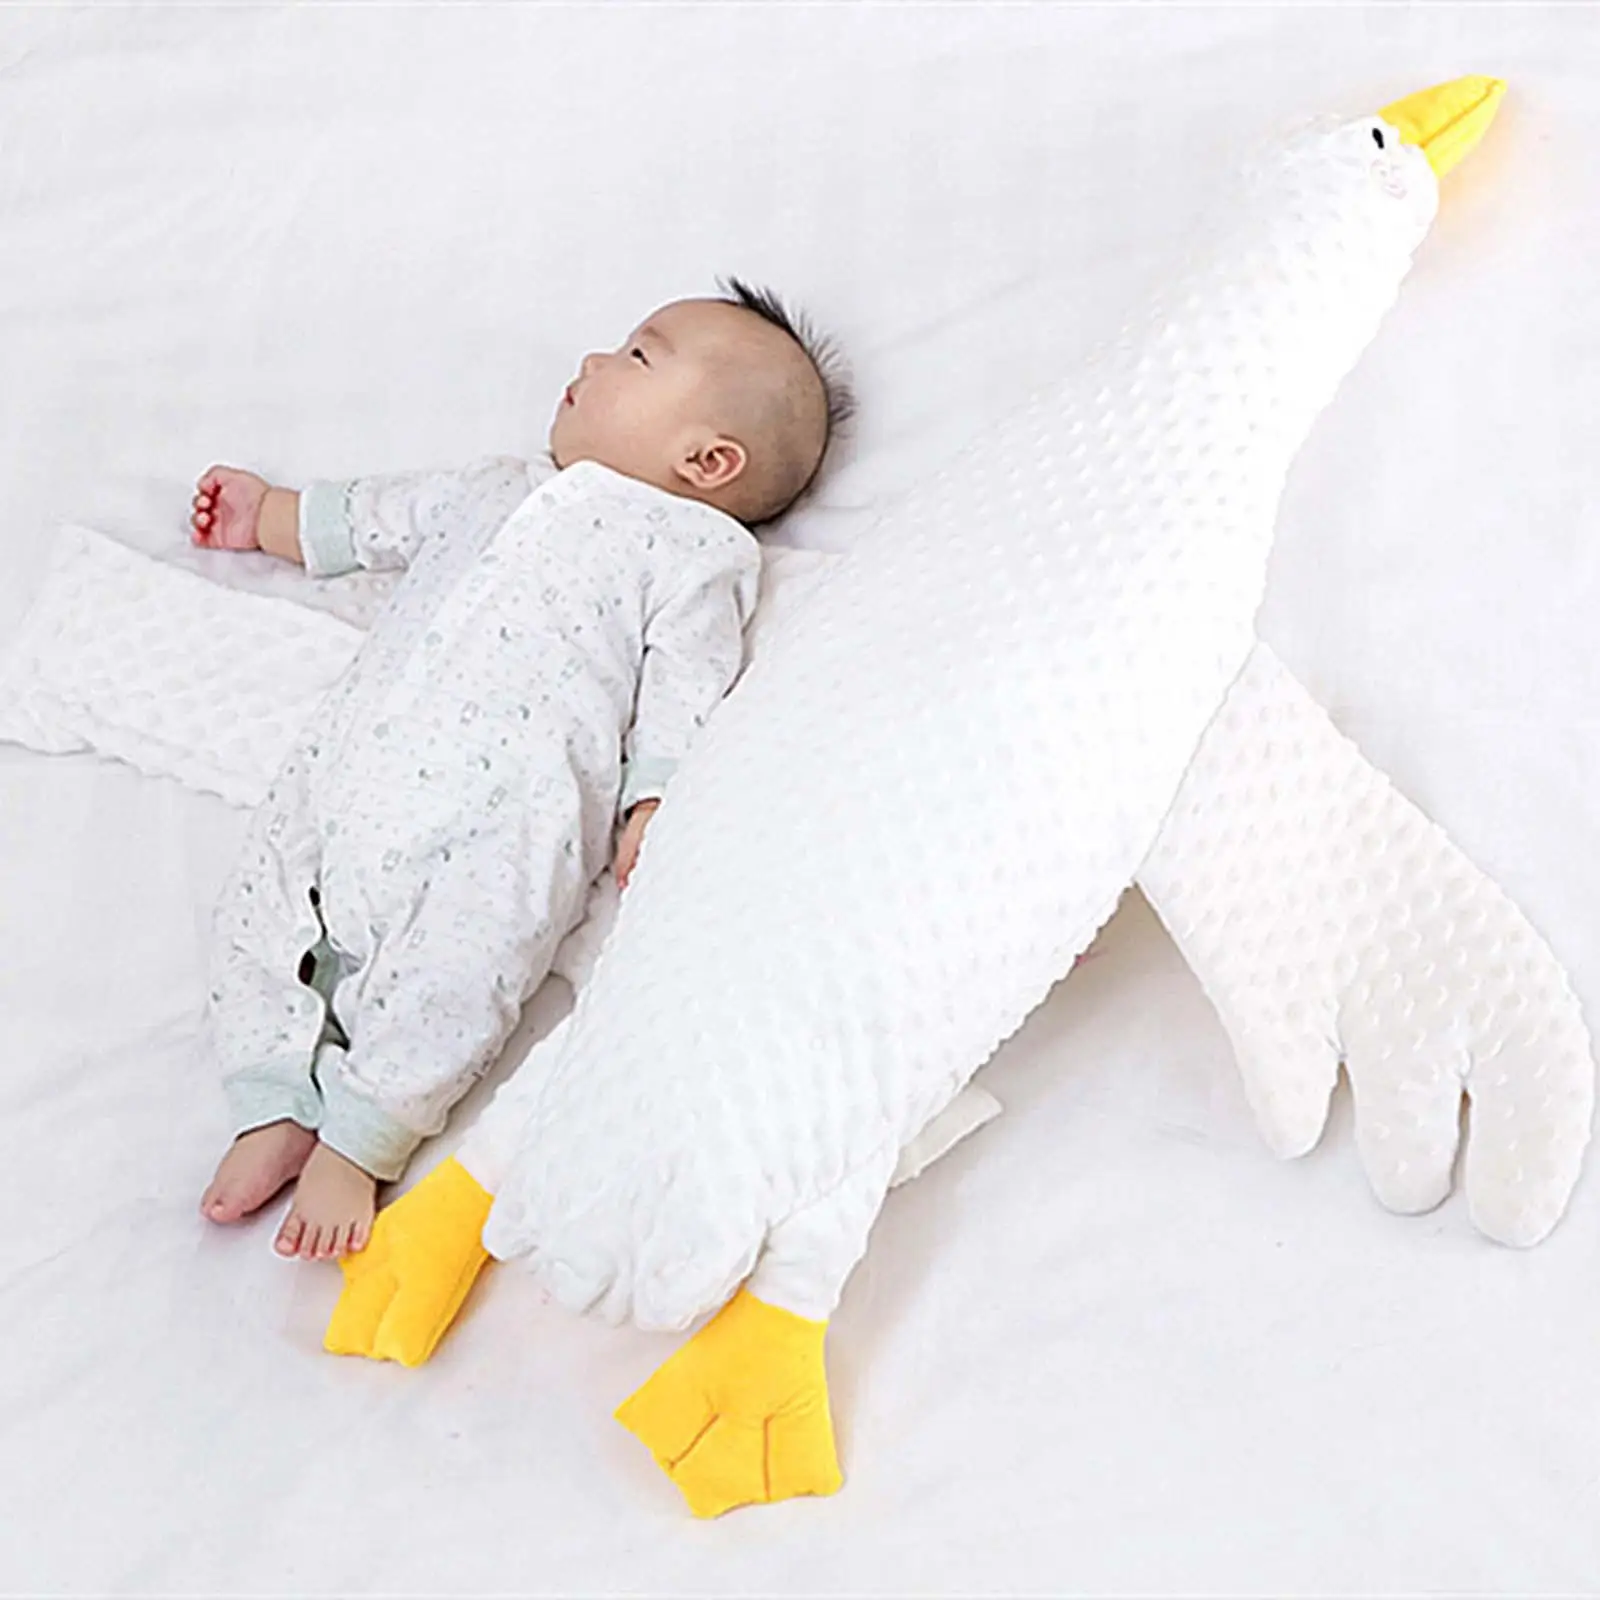 Cute Baby  Detachable Infant Soothing  Soft Easy to Clean Toddler  Plush  for Newborns Children Kids